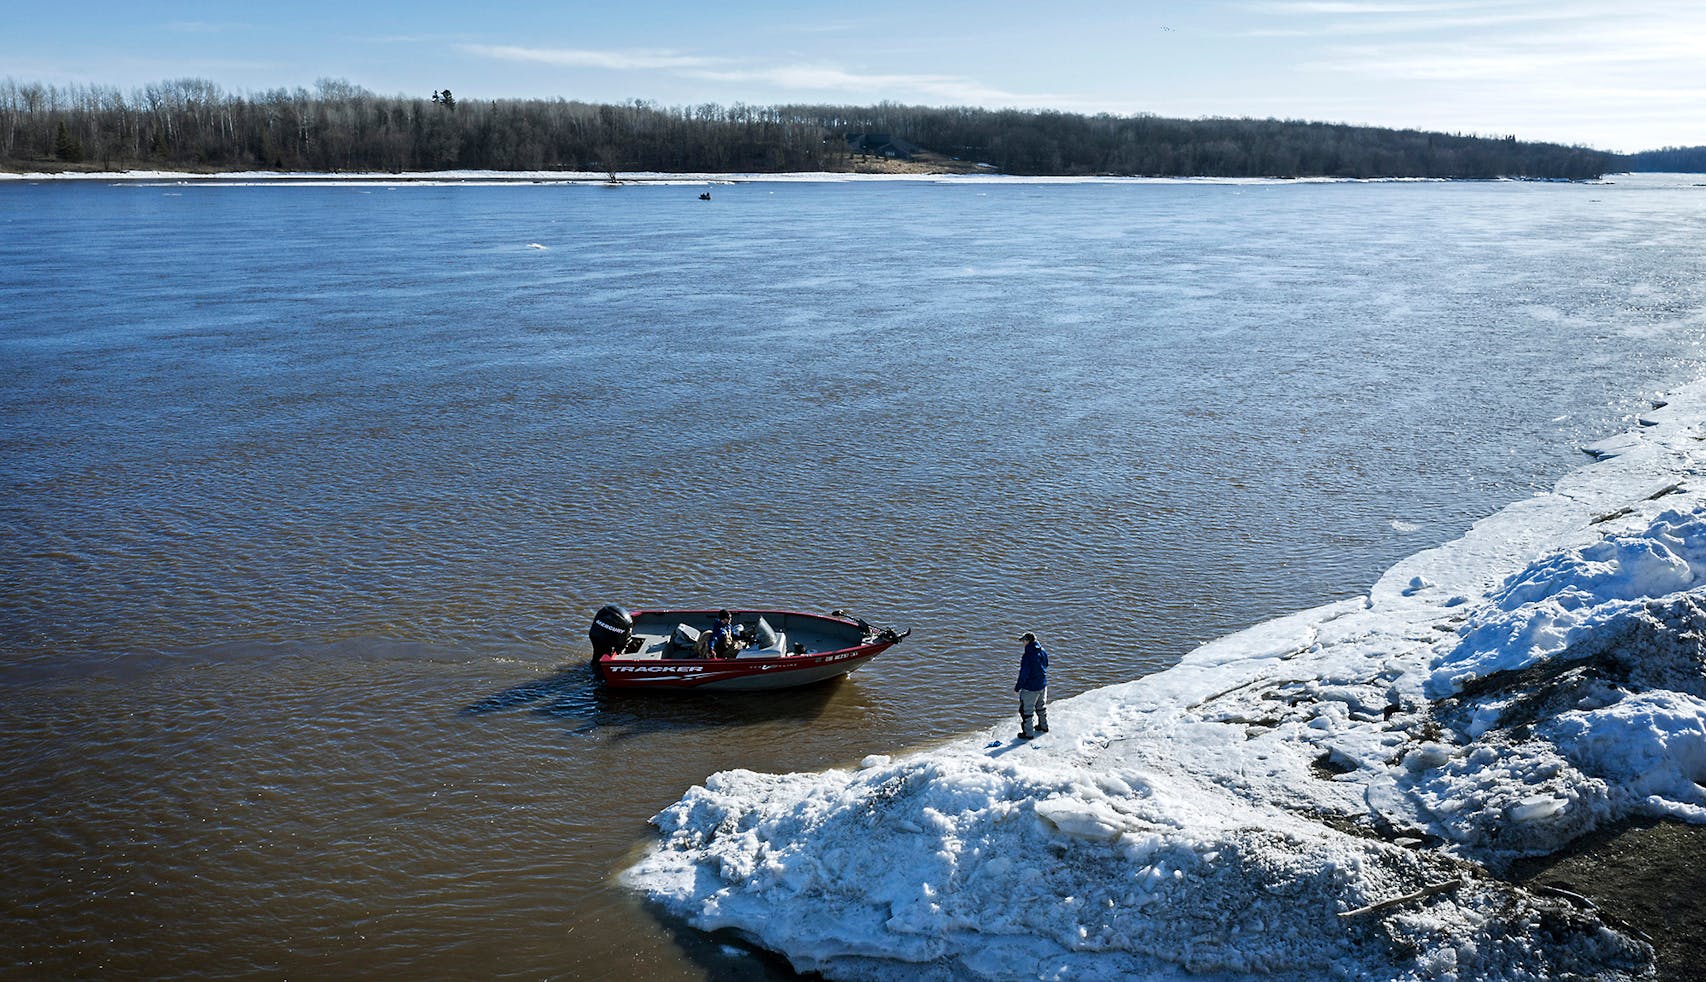 As the ice melts off the northern edge of Minnesota, anglers go after the prized walleye run. Though ice-out dates are erratic, the river is trending to about 10 fewer days of ice now than it had 90 years ago. And that puts pressure on the fishery.